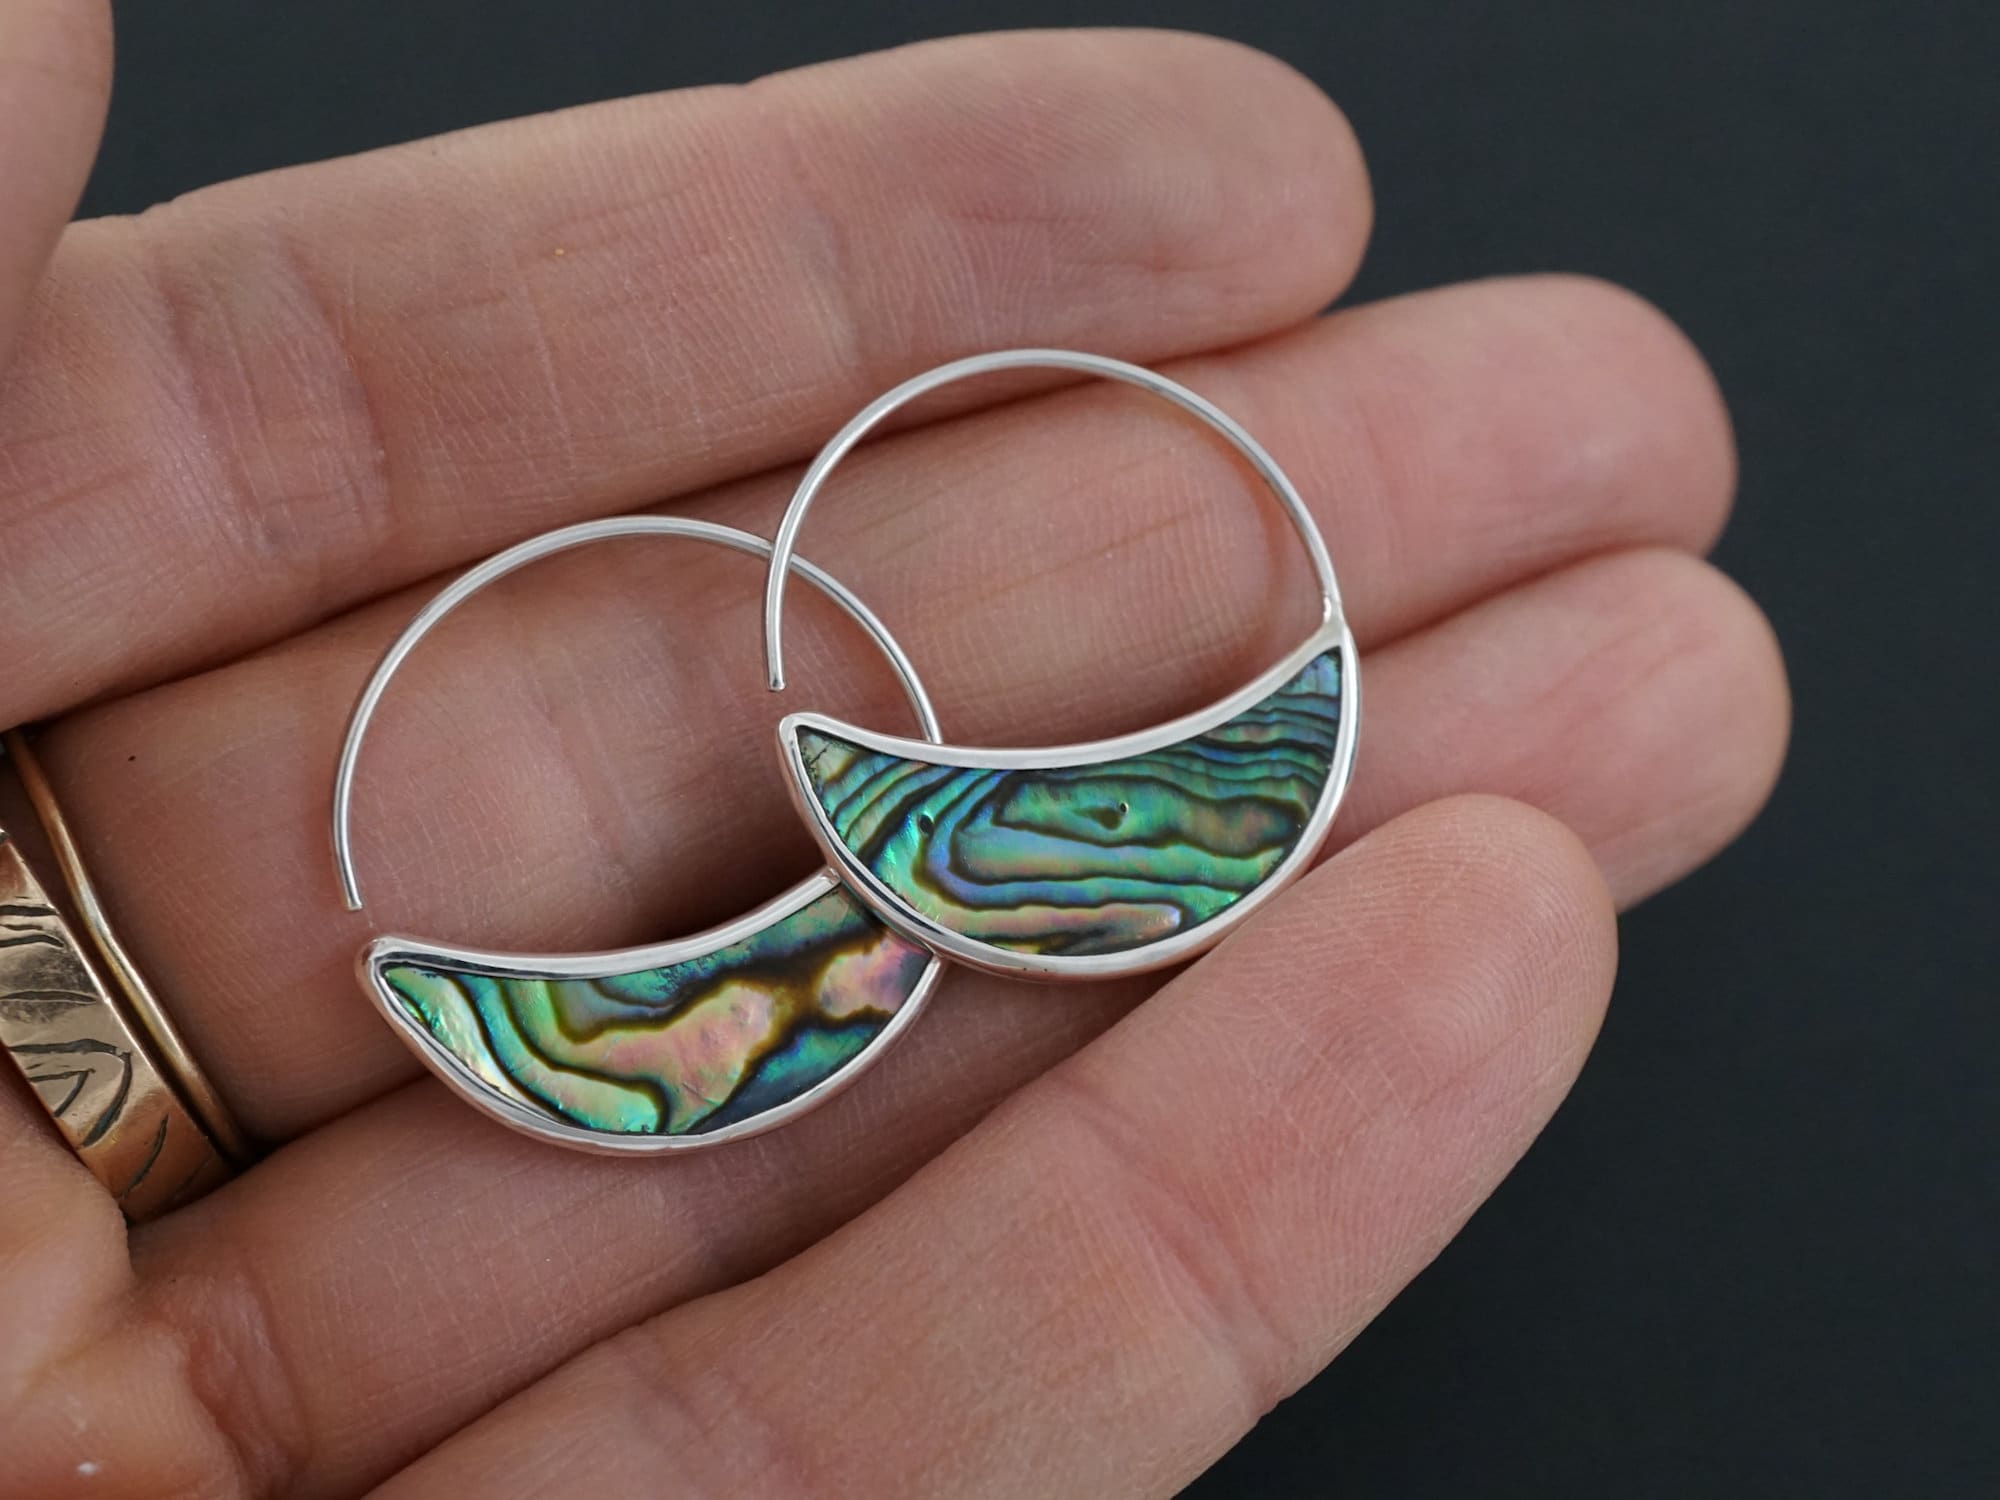 Abalone and Sterling Silver Hoop Earrings. Ocean Lover Gift for Pisces, Scorpio, Cancer